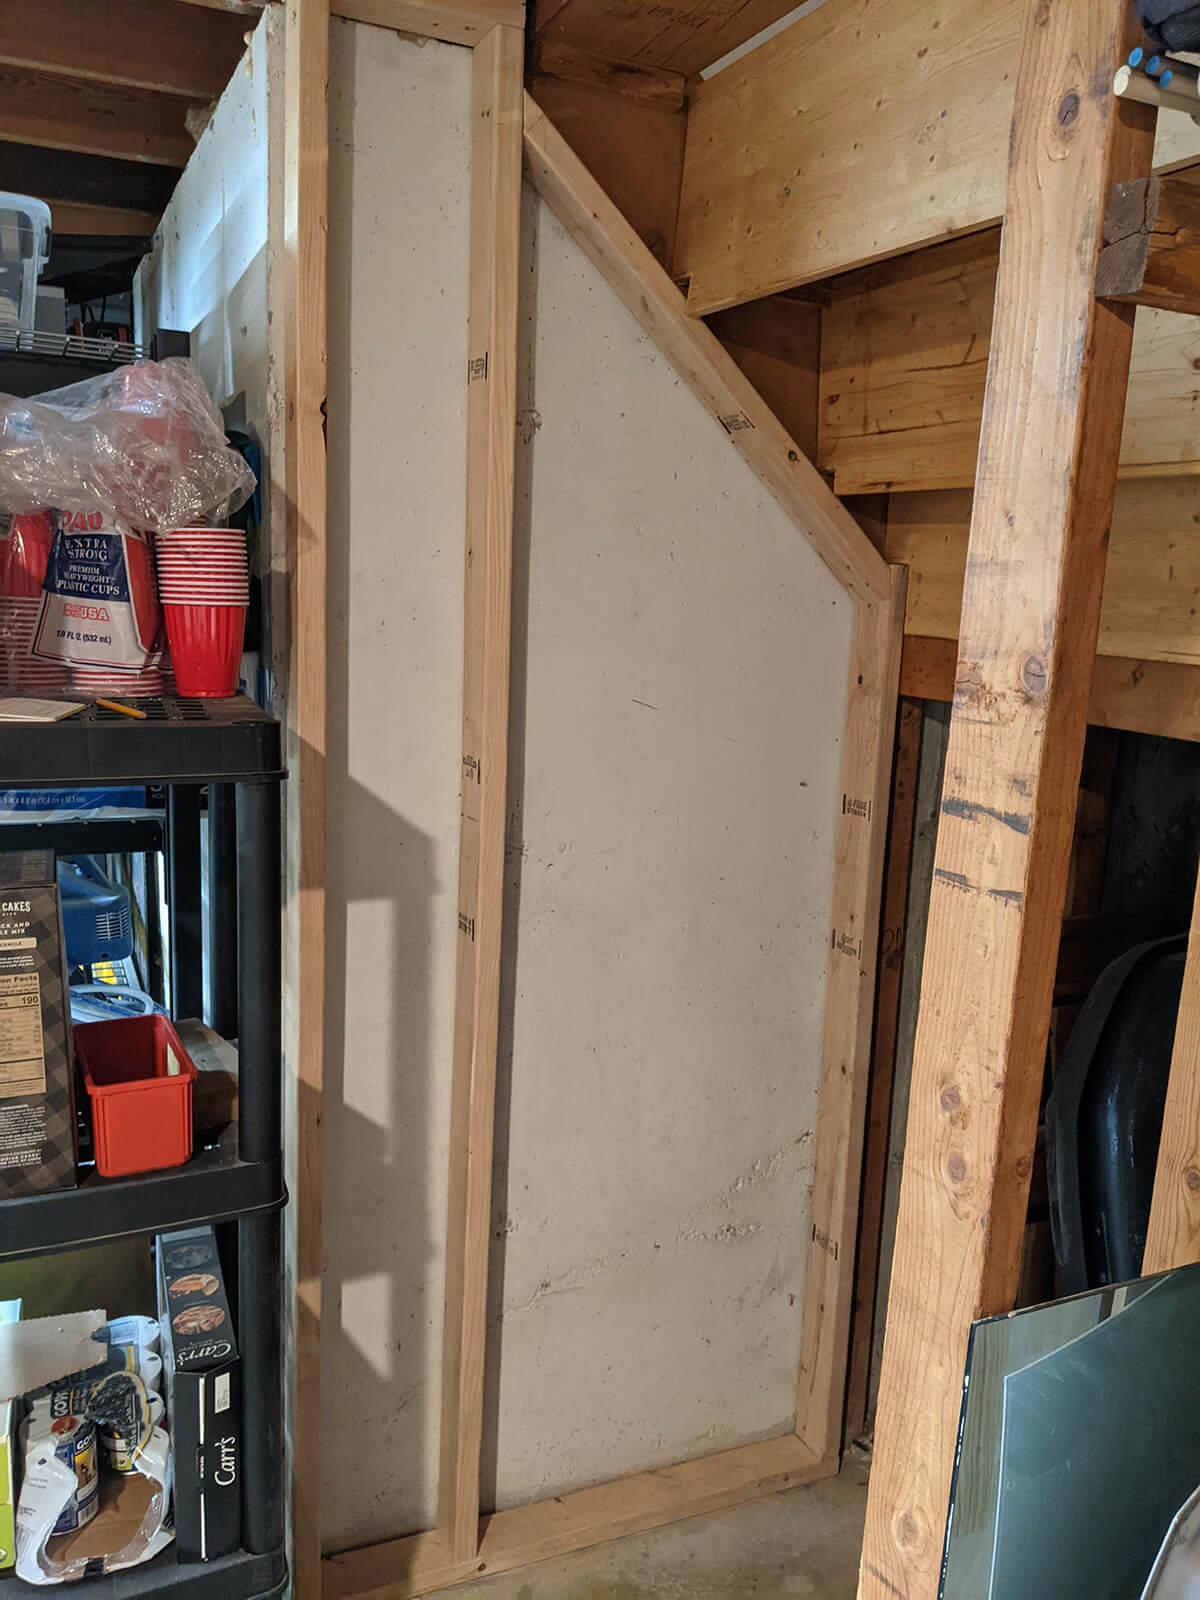 Starting to frame the wall under the stairs with 2x4 studs